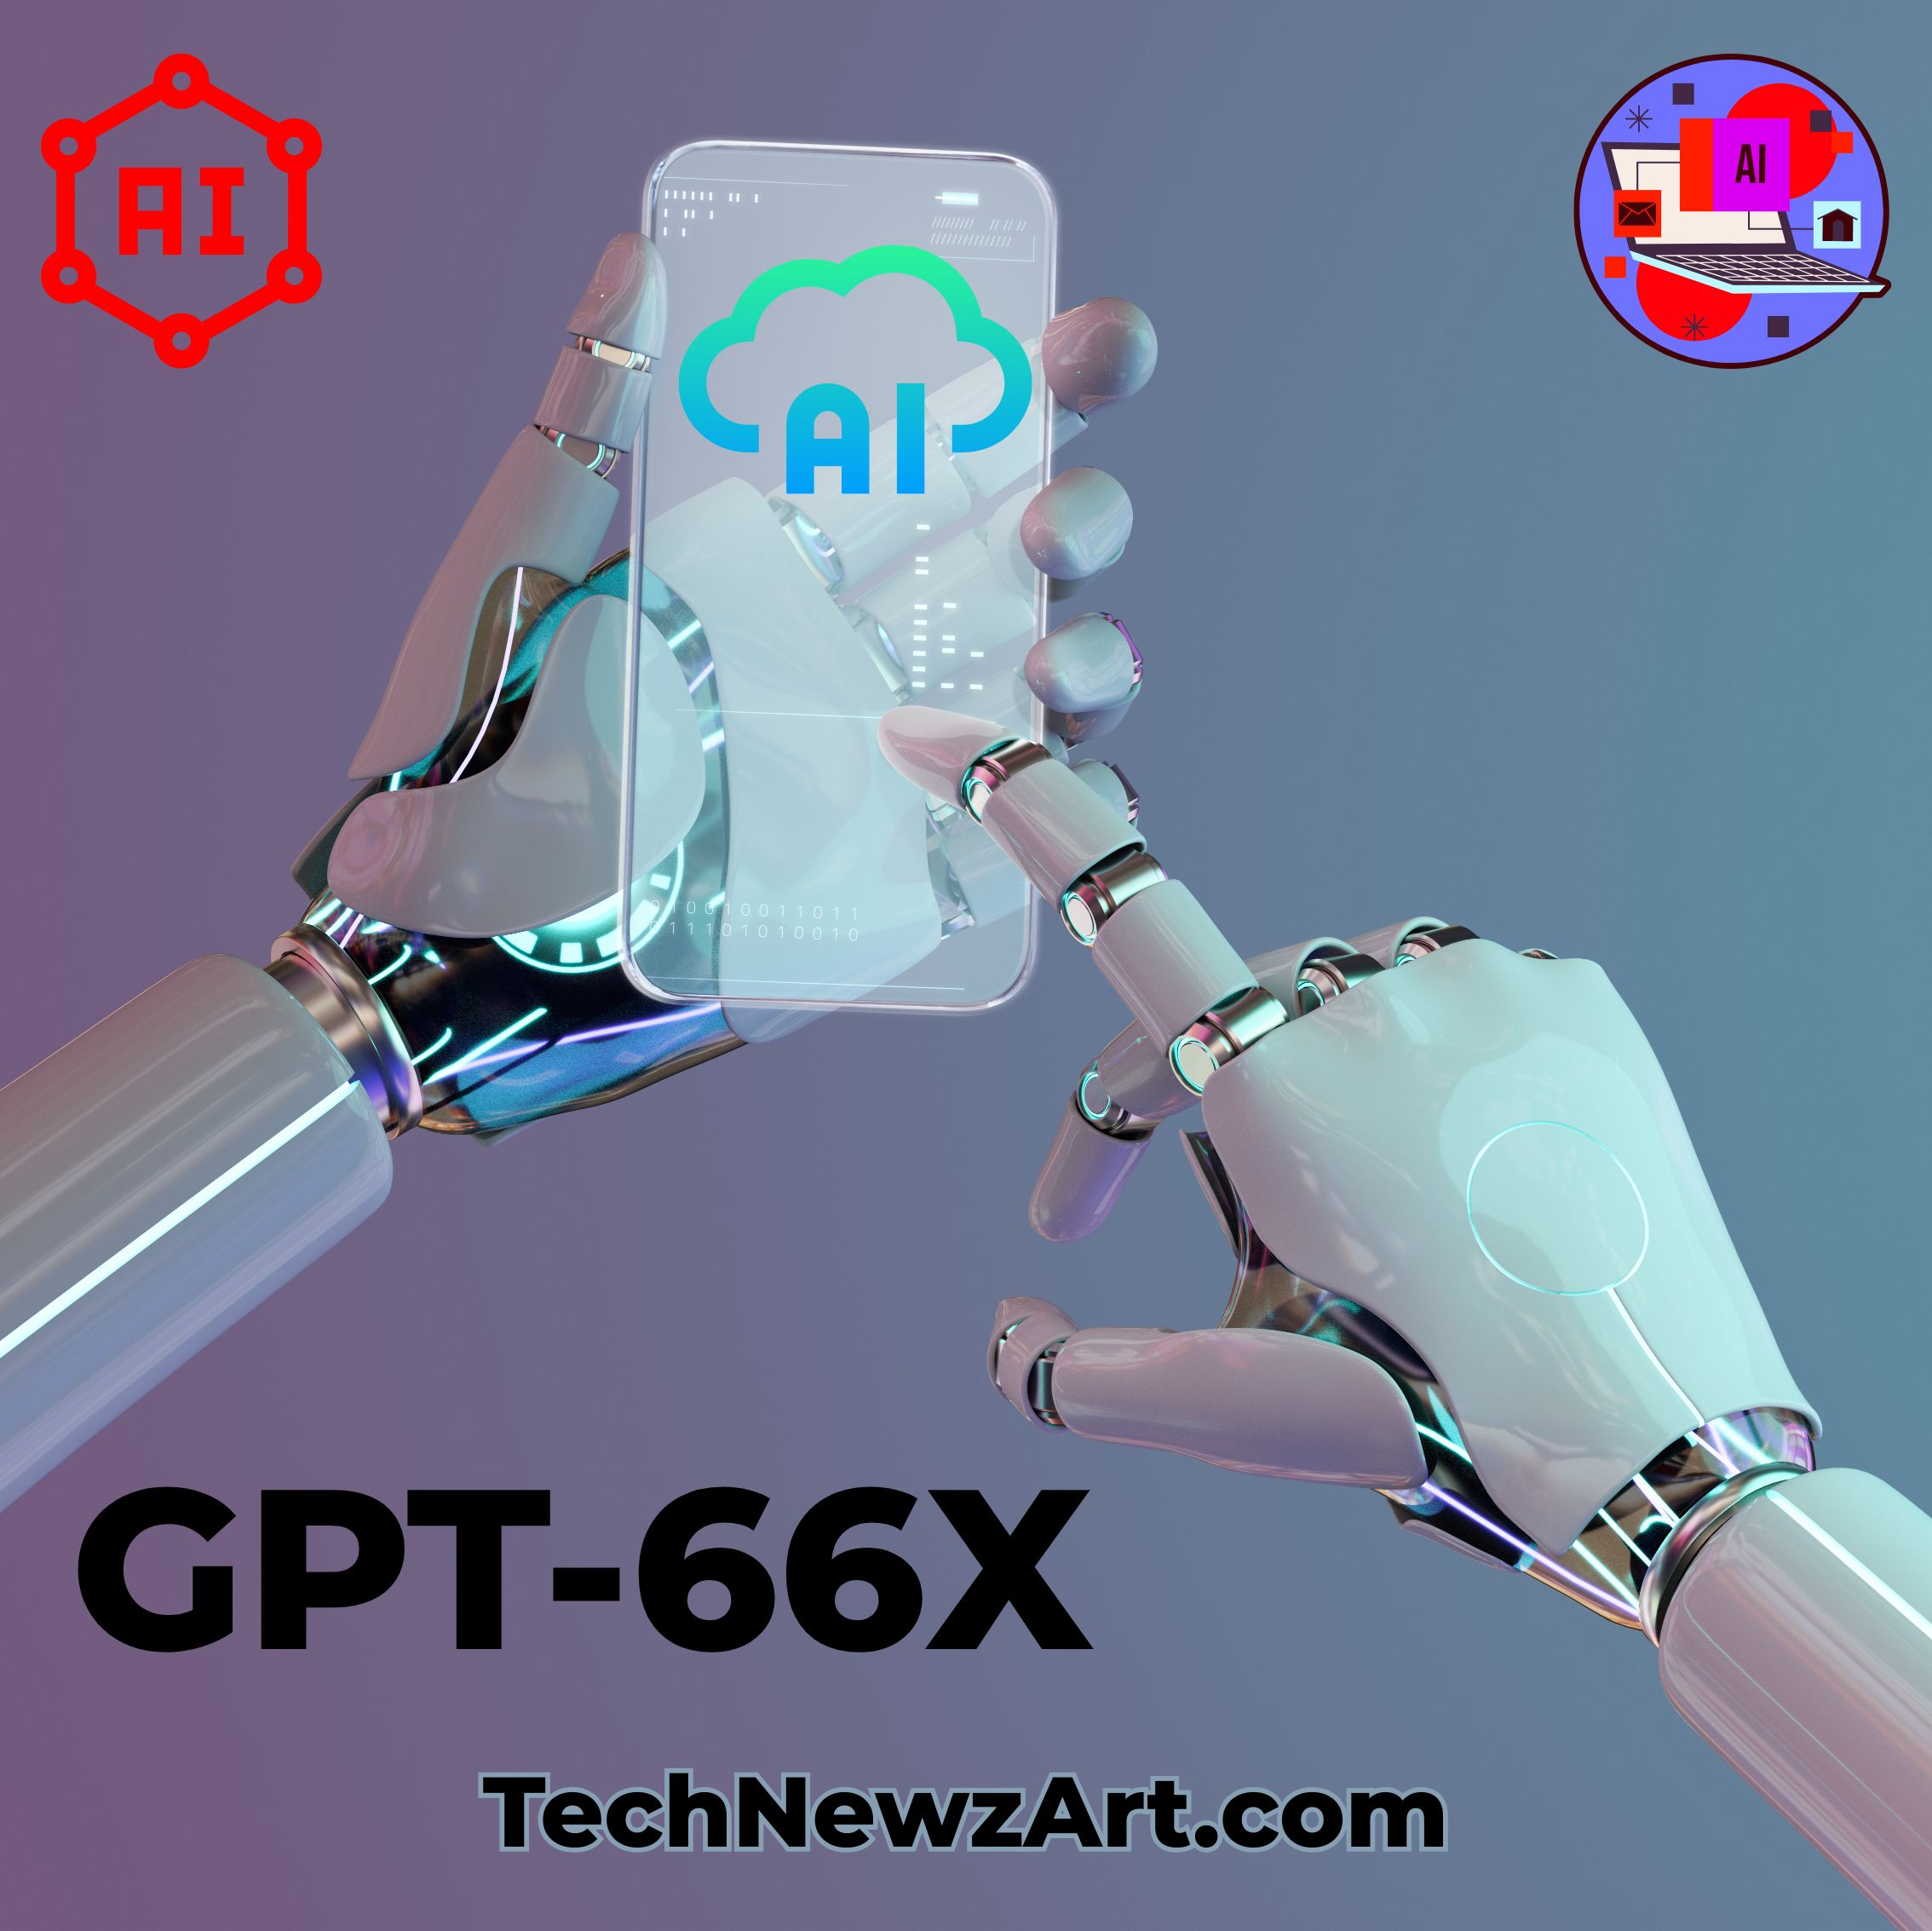 What is GPT-66X: Realize about it